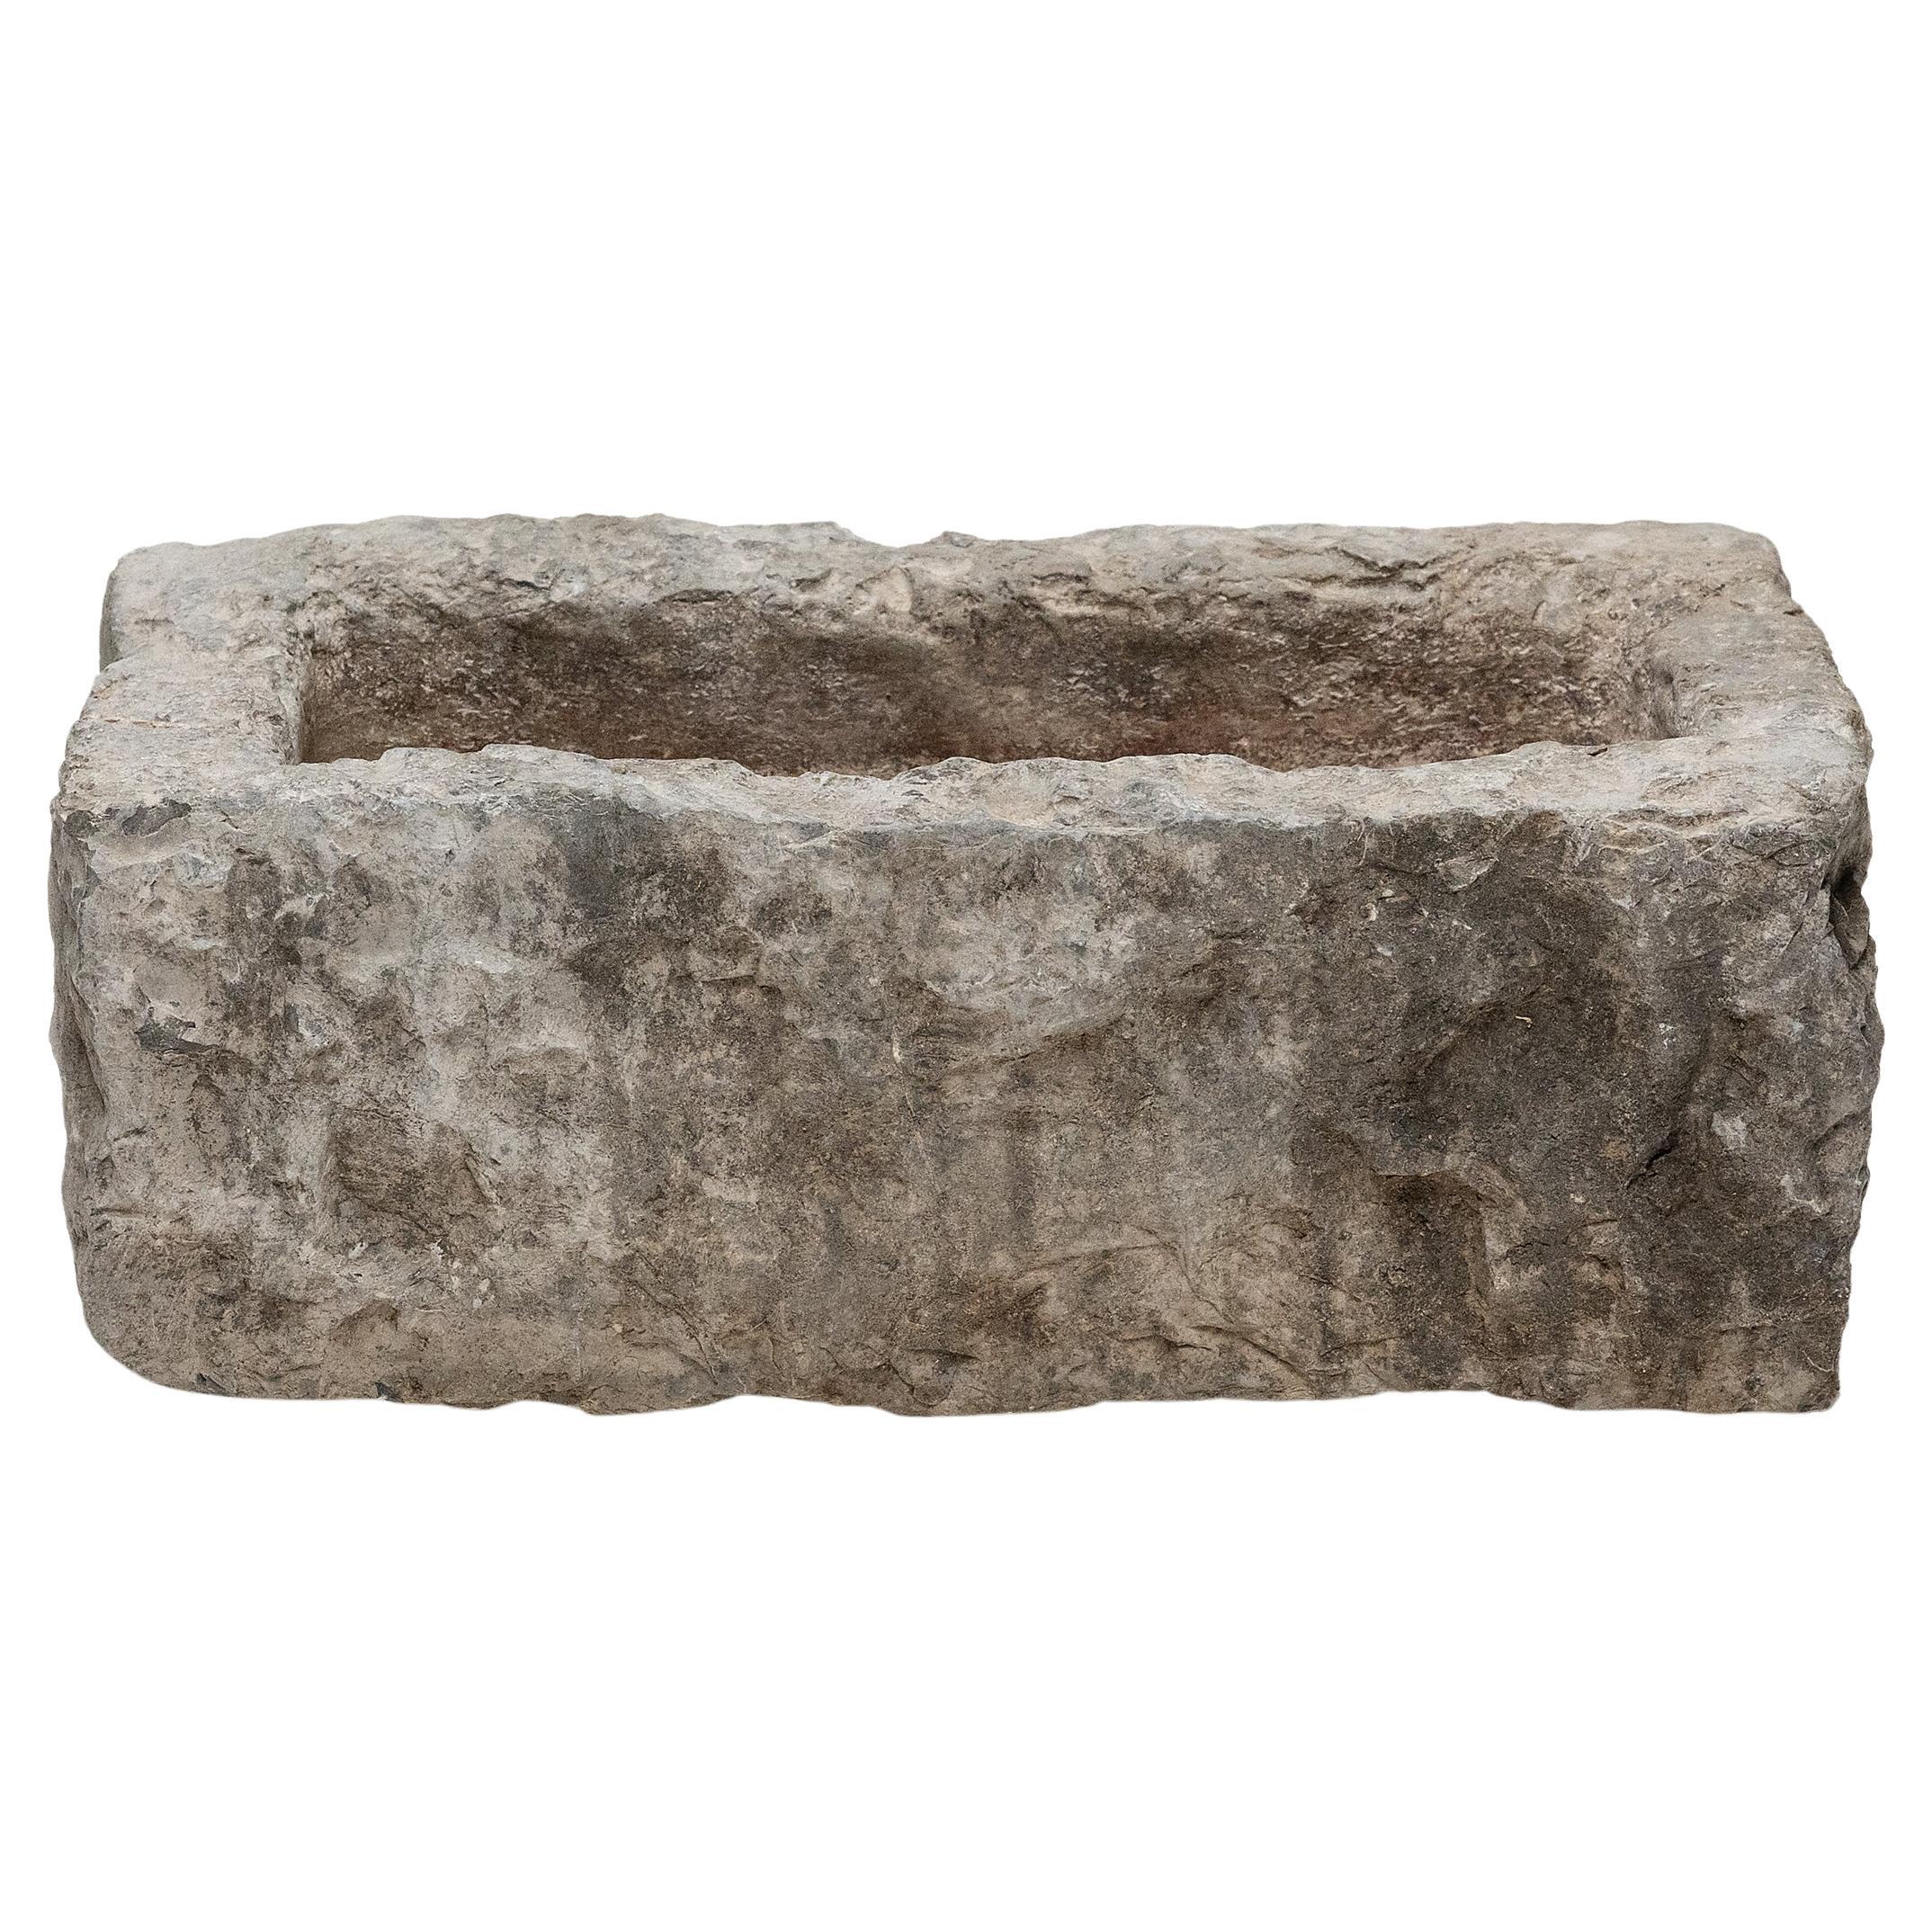 Petite Chinese Stone Trough, c. 1800 For Sale